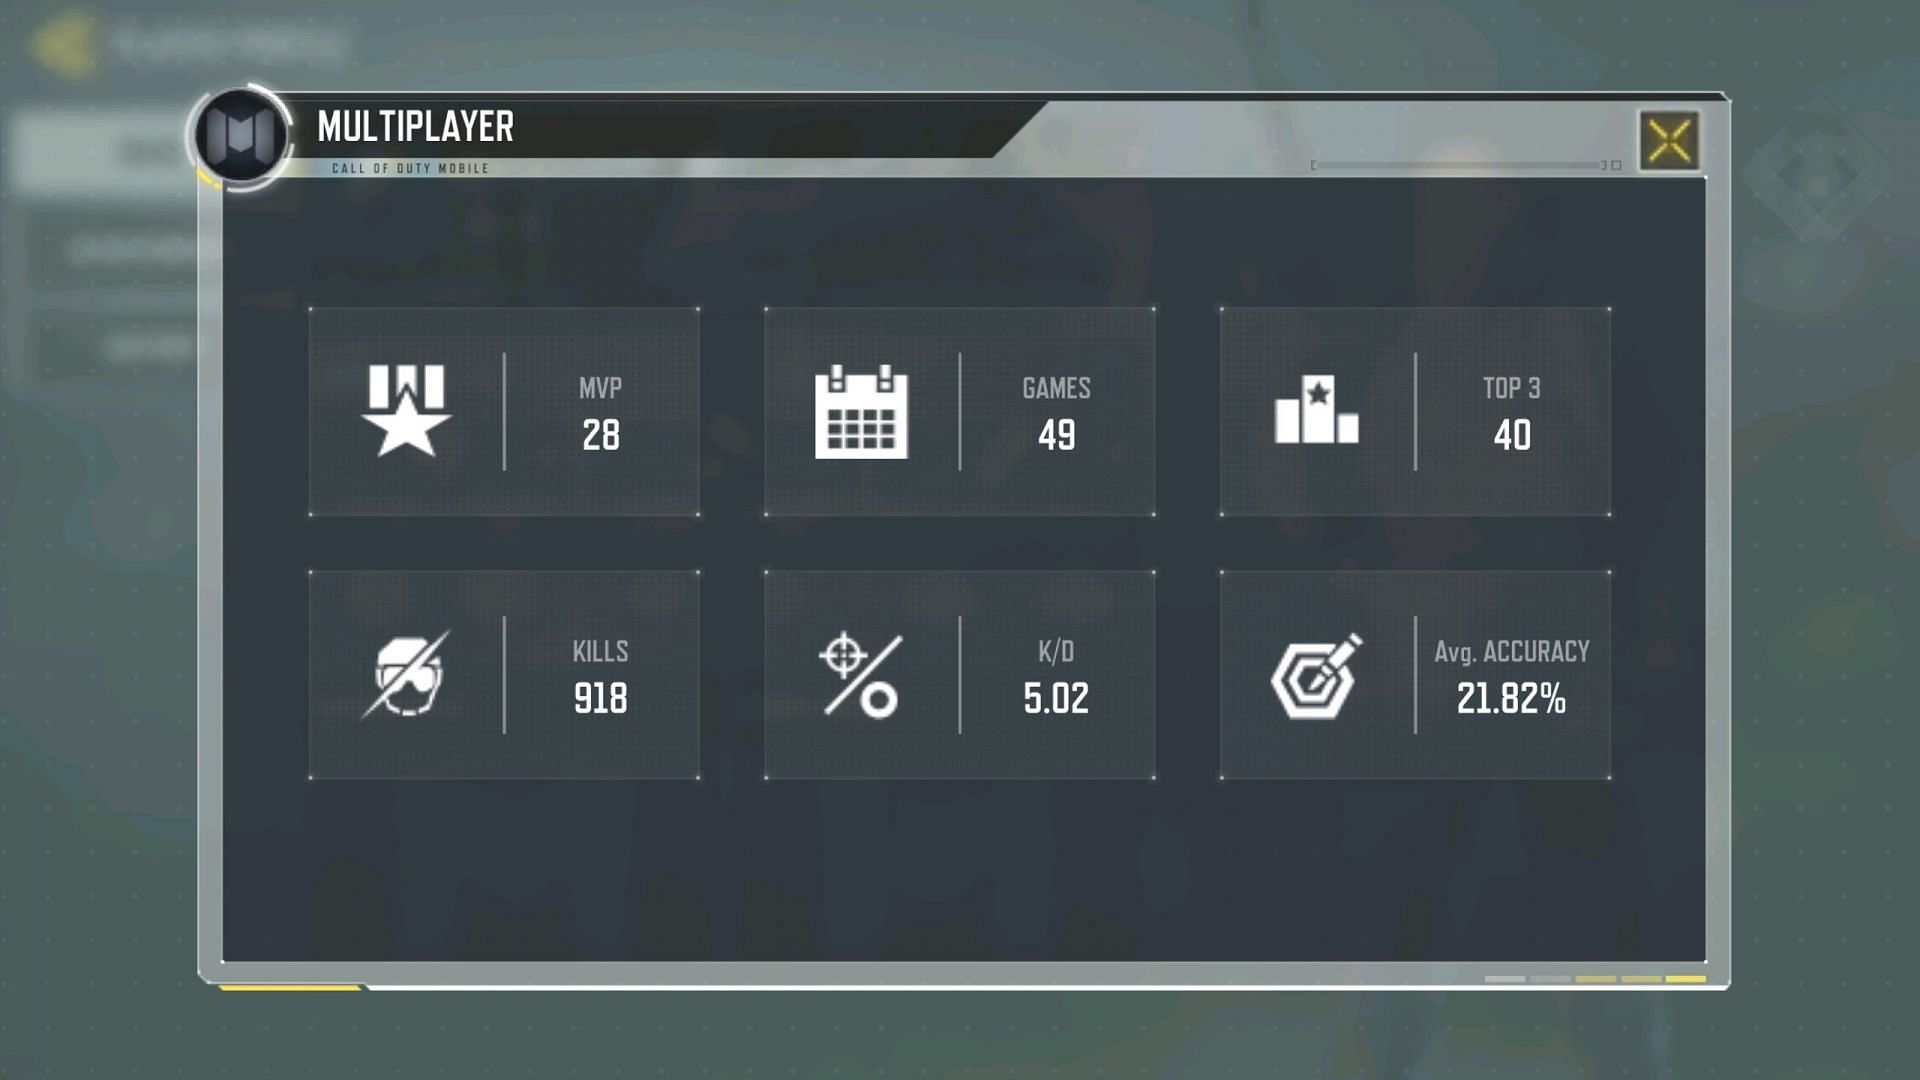 Piyush Joshi&#039;s stats in the Multiplayer mode of the game (Image via Activision)